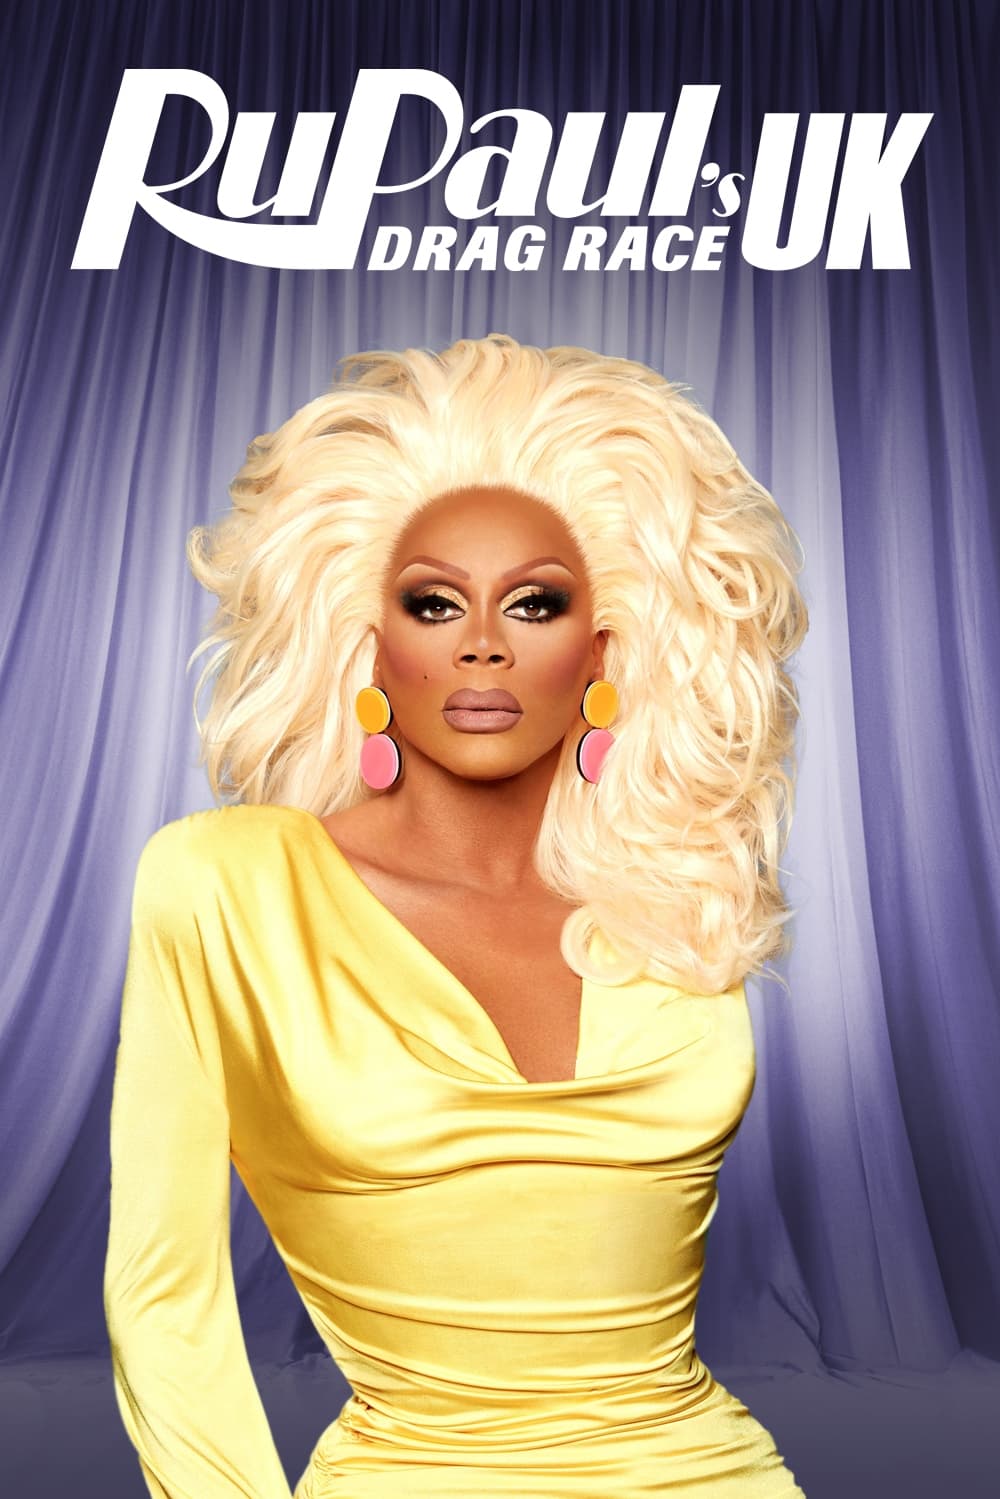 RuPaul's Drag Race UK TV Shows About Performance Art